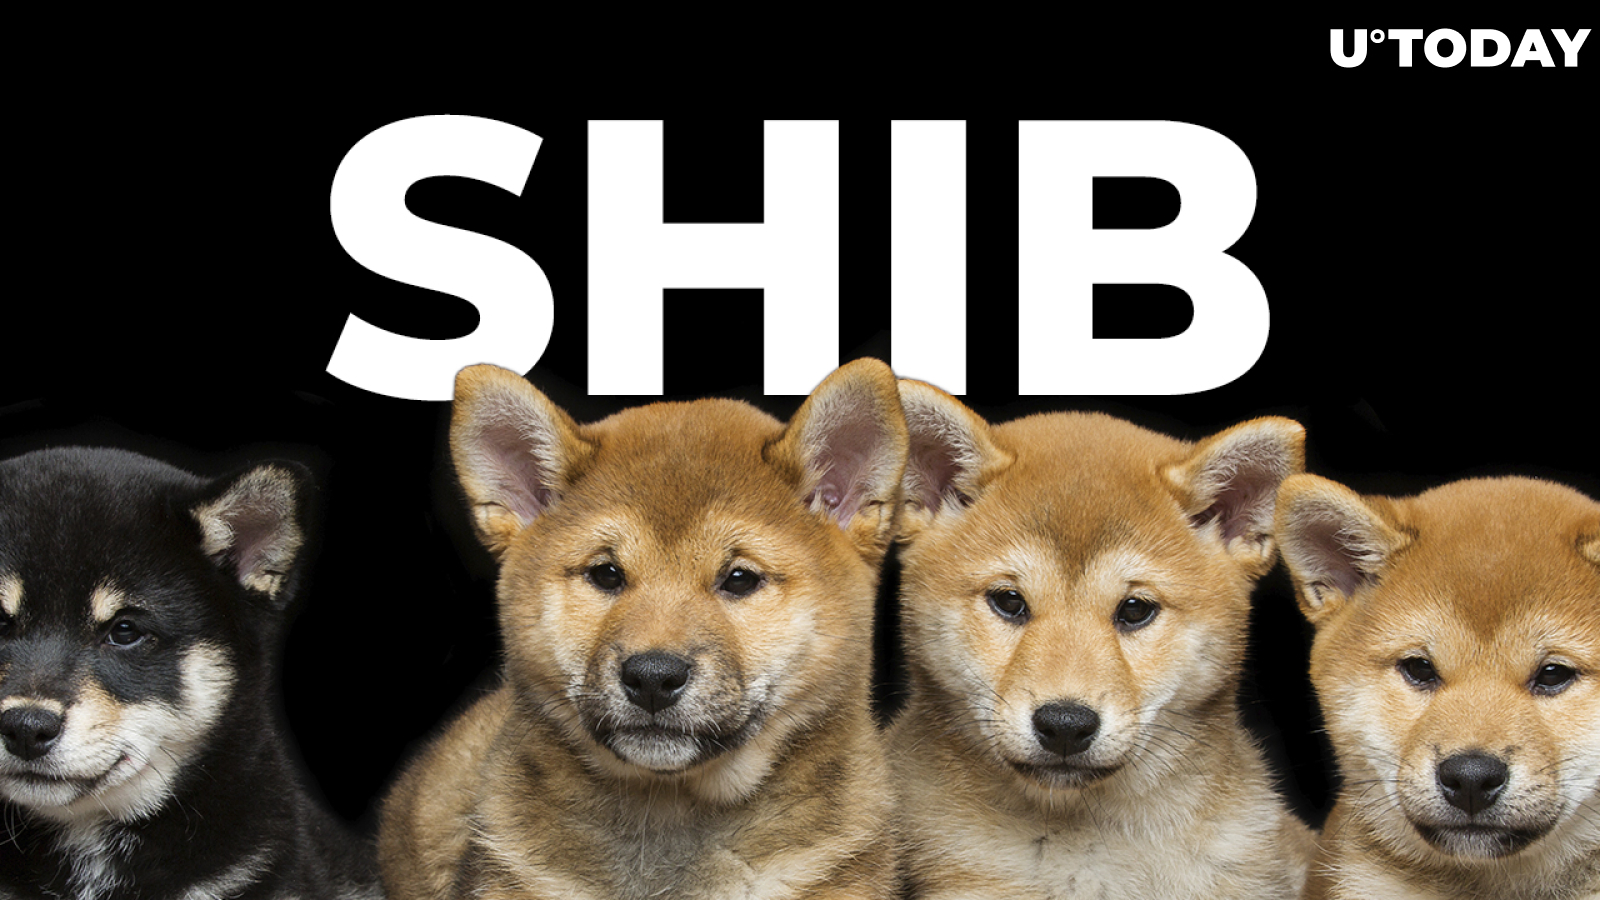 SHIB 800% Rally Reflected in Real Shiba Inu Puppy Sales